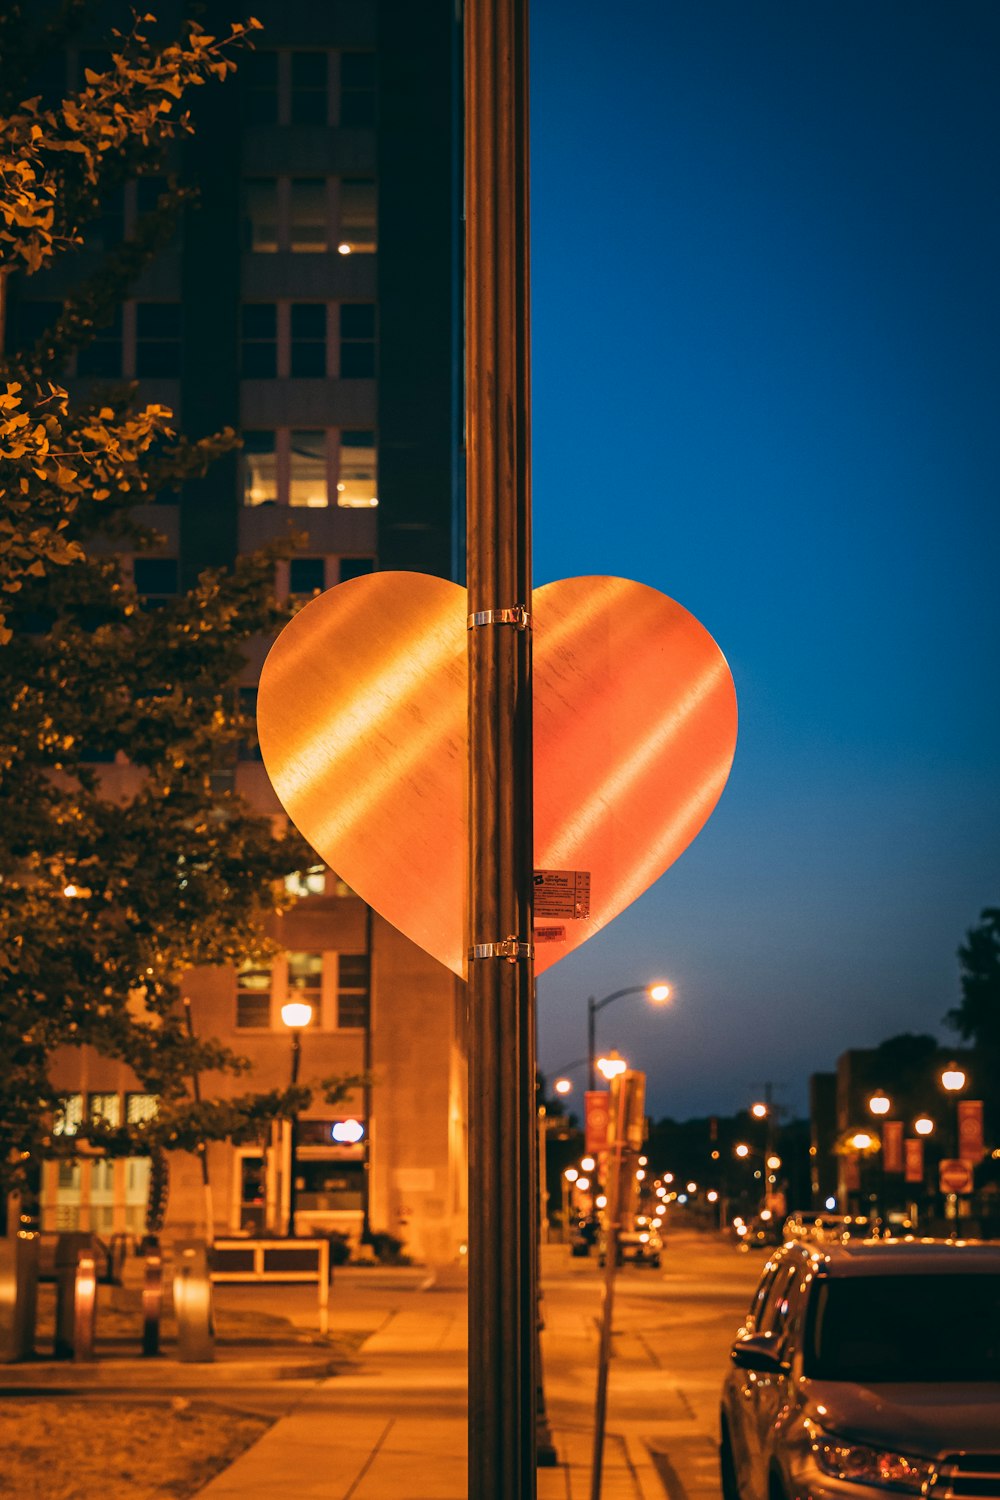 heart-shaped signage on lamp post